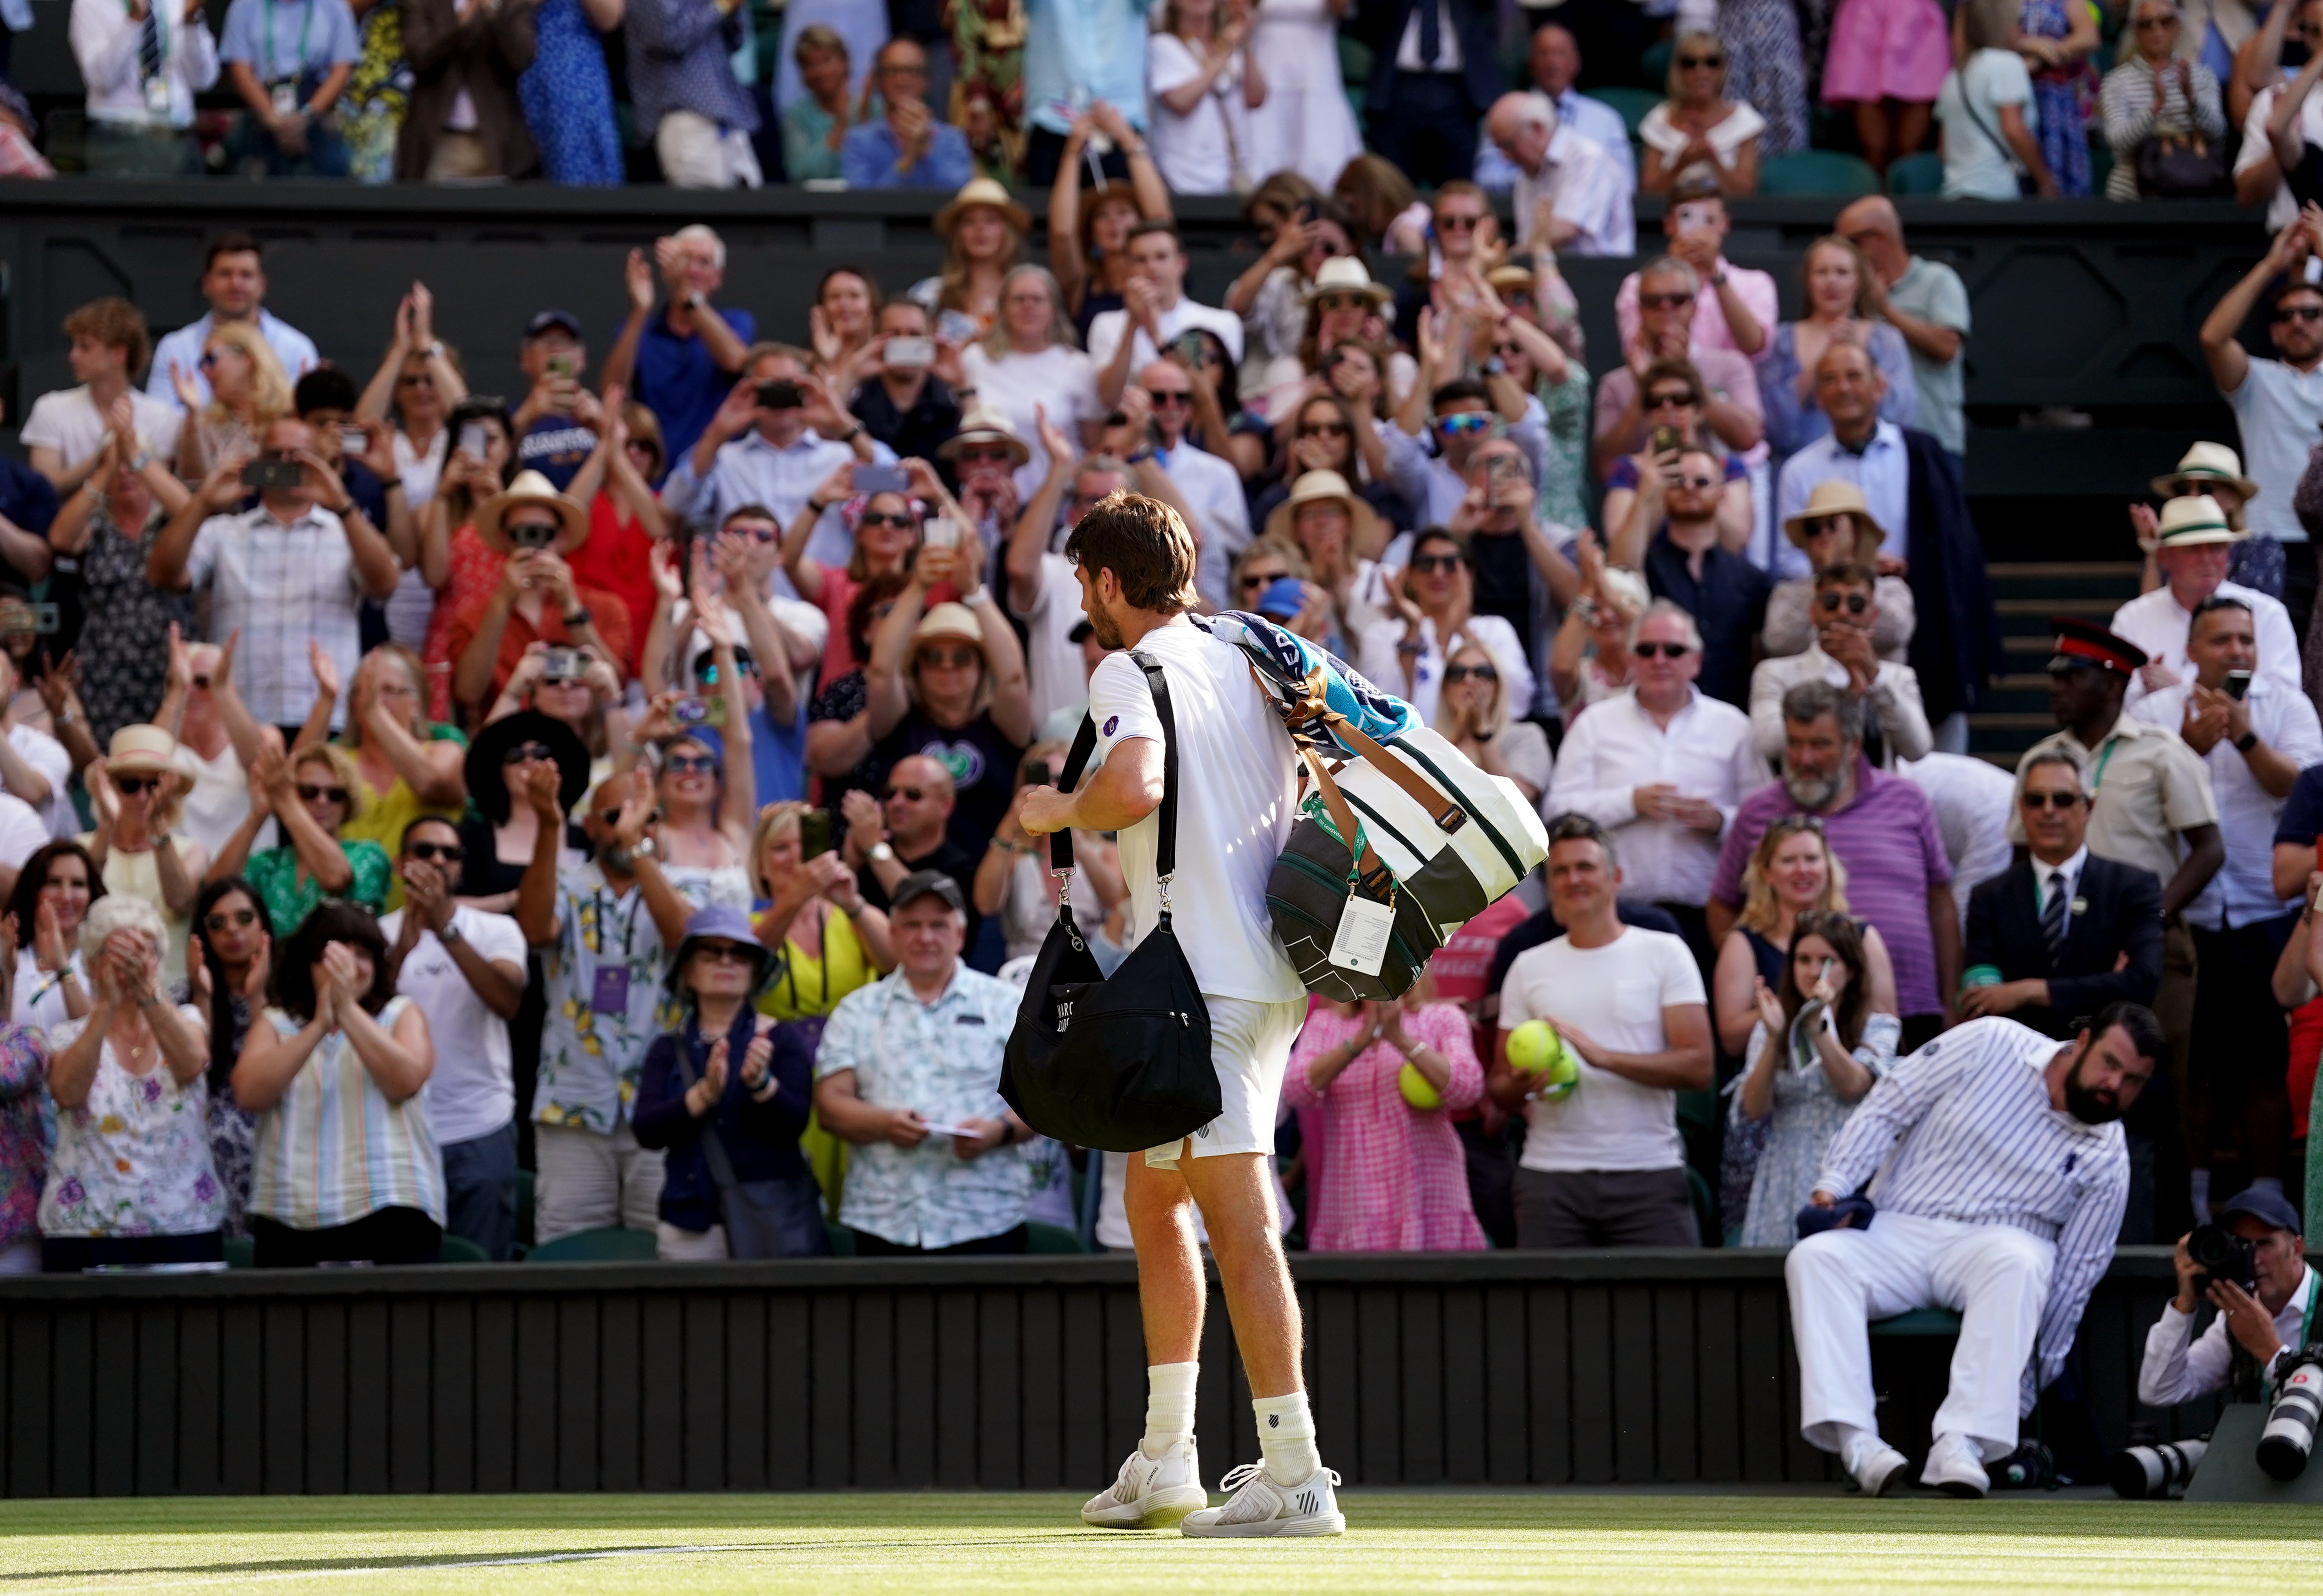 Cameron Norrie earns the acclaim of Centre Court after exiting Wimbledon following a semi-final defeat to Novak Djokovic (Adam Davy/PA)